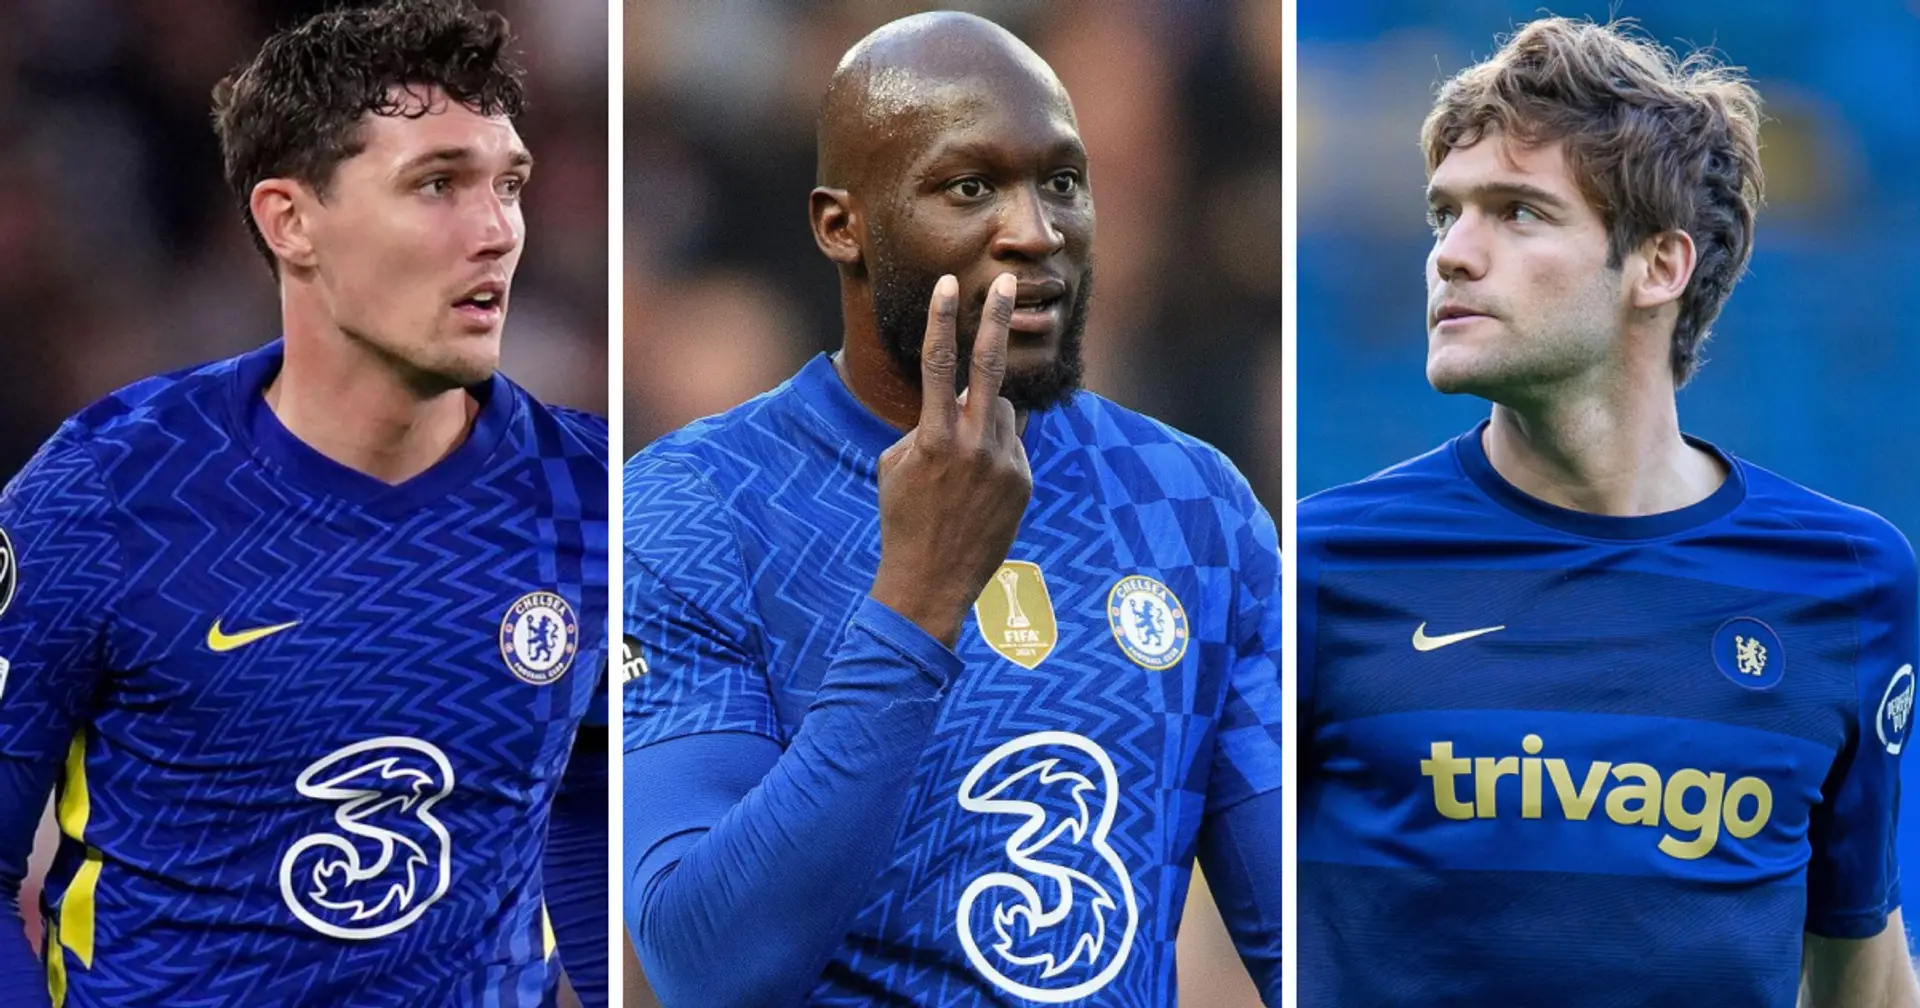 6 players confirmed to leave Chelsea in June, 4 more could follow in massive clearout